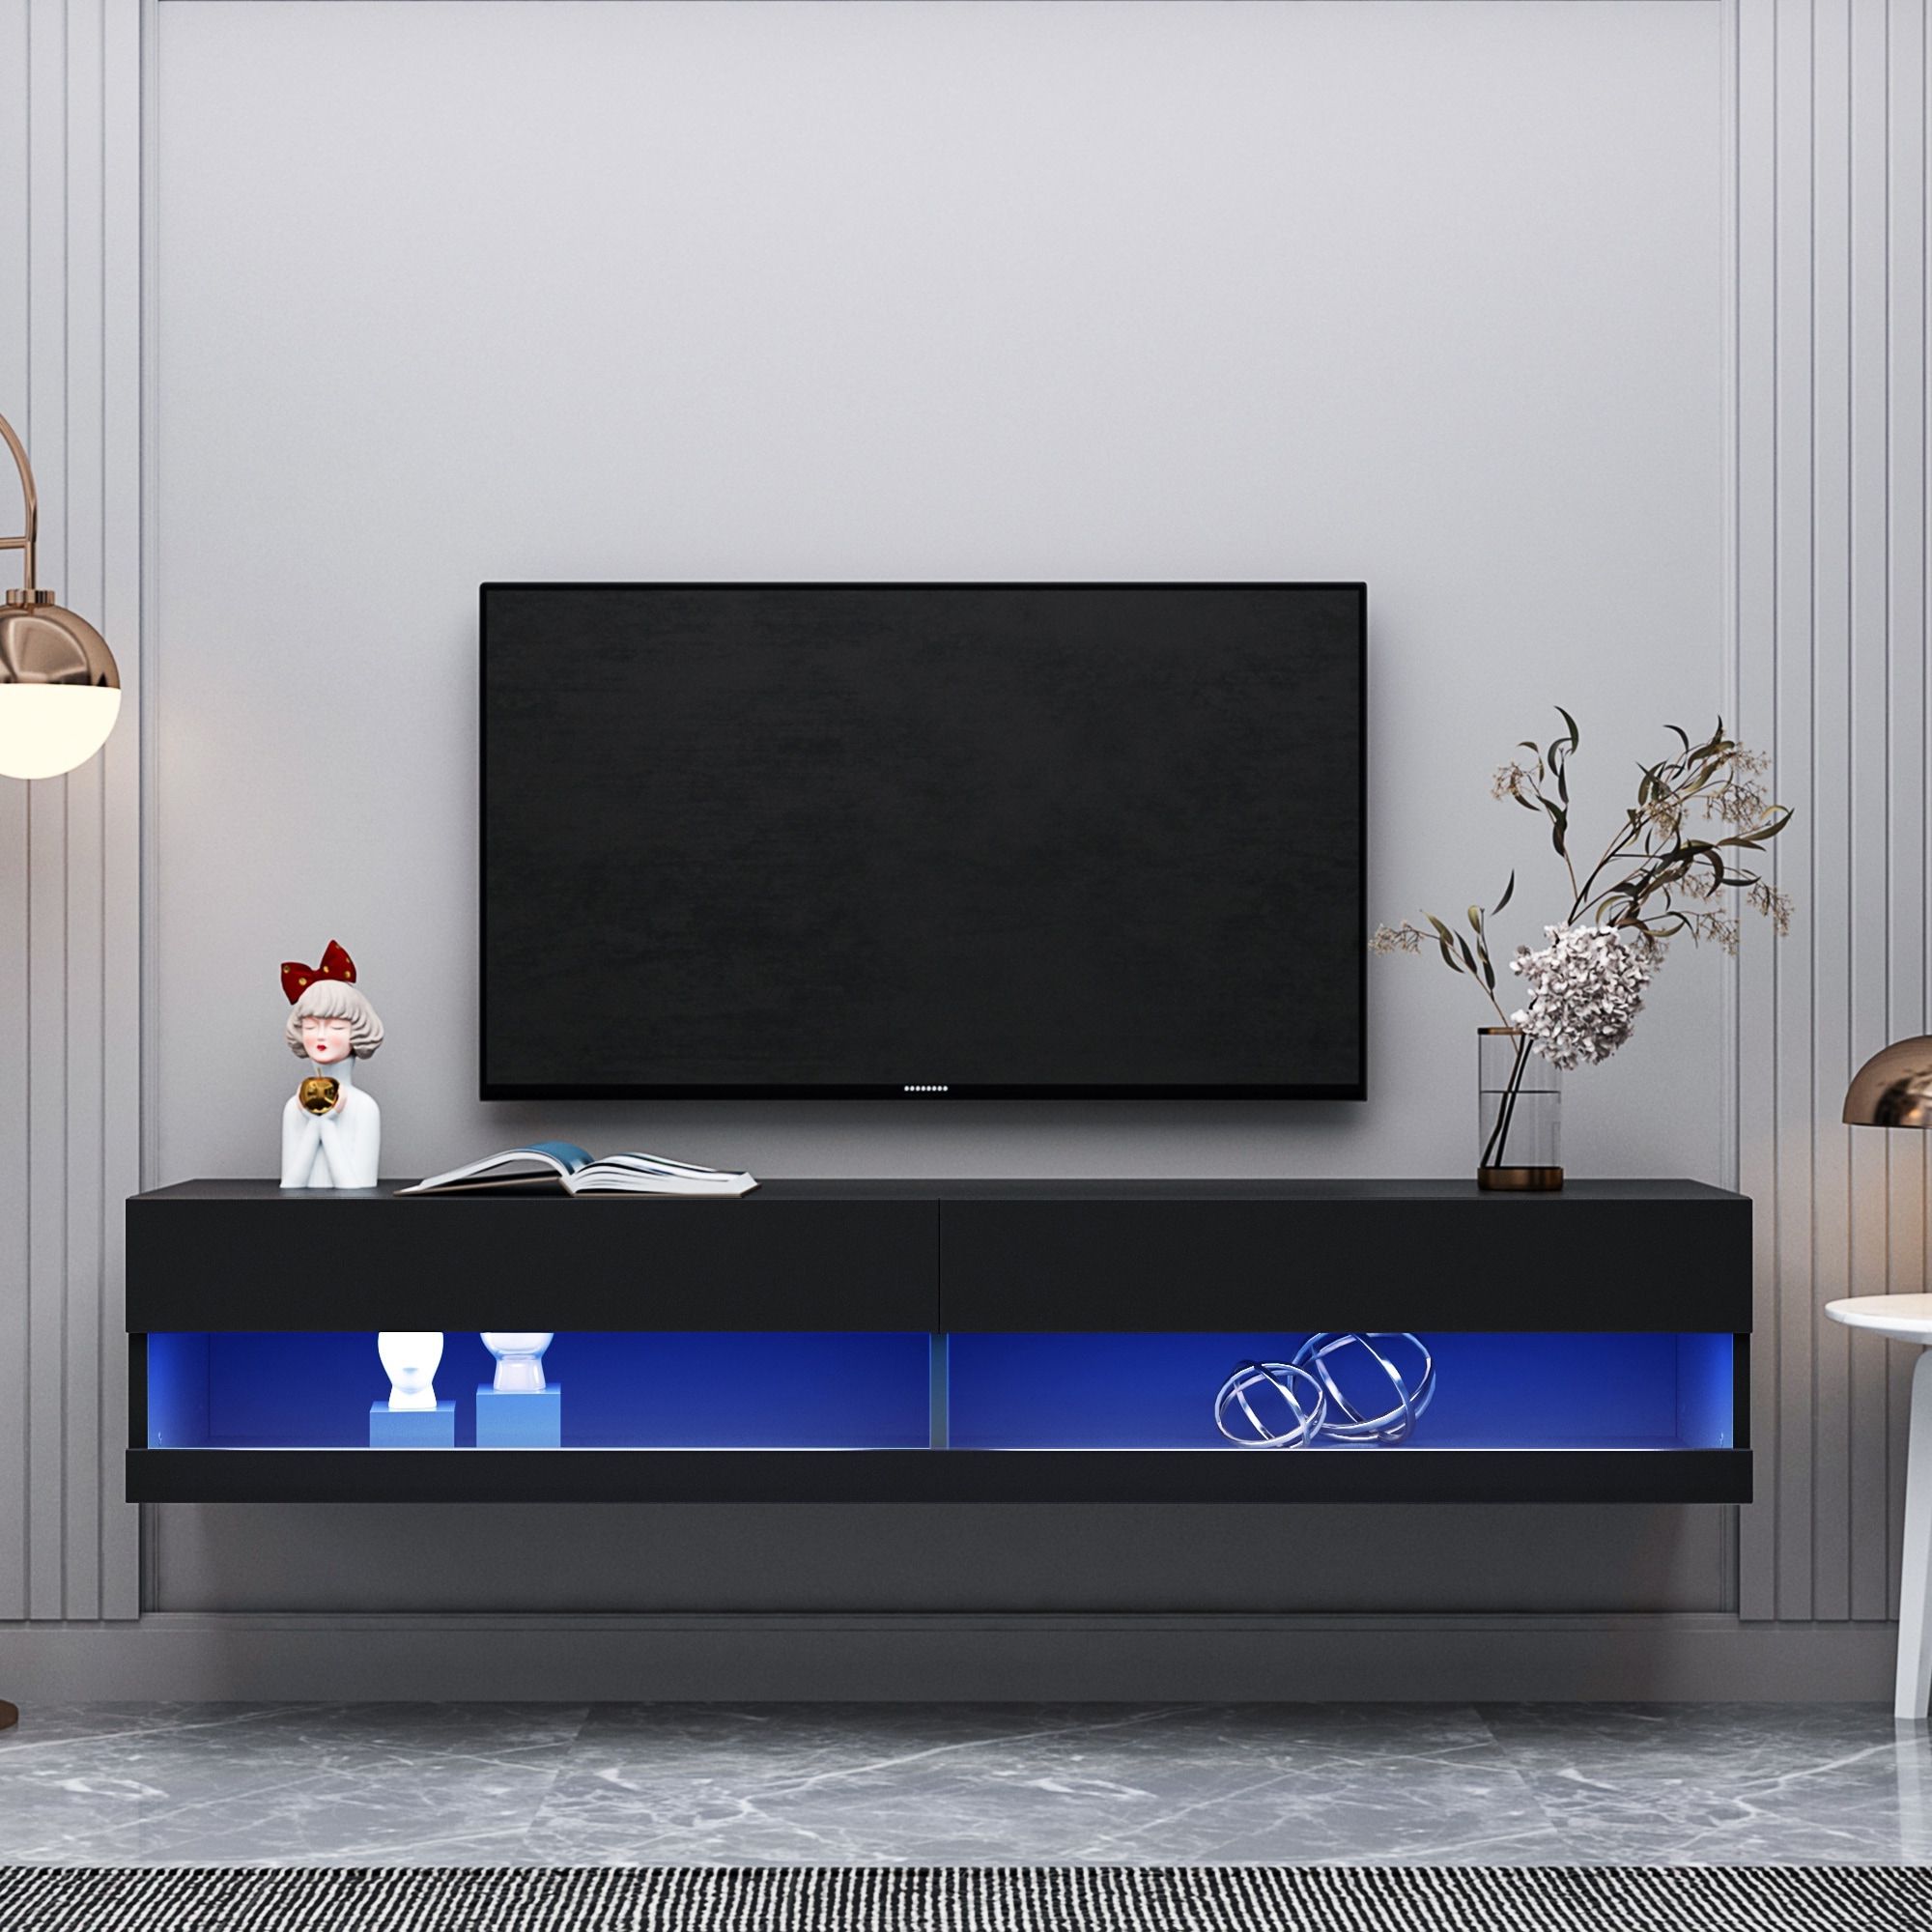 Wall Mounted Floating Tv Stand With Led Lights And Storage Compartments –  Bed Bath & Beyond – 38286386 Throughout Wall Mounted Floating Tv Stands (View 9 of 20)